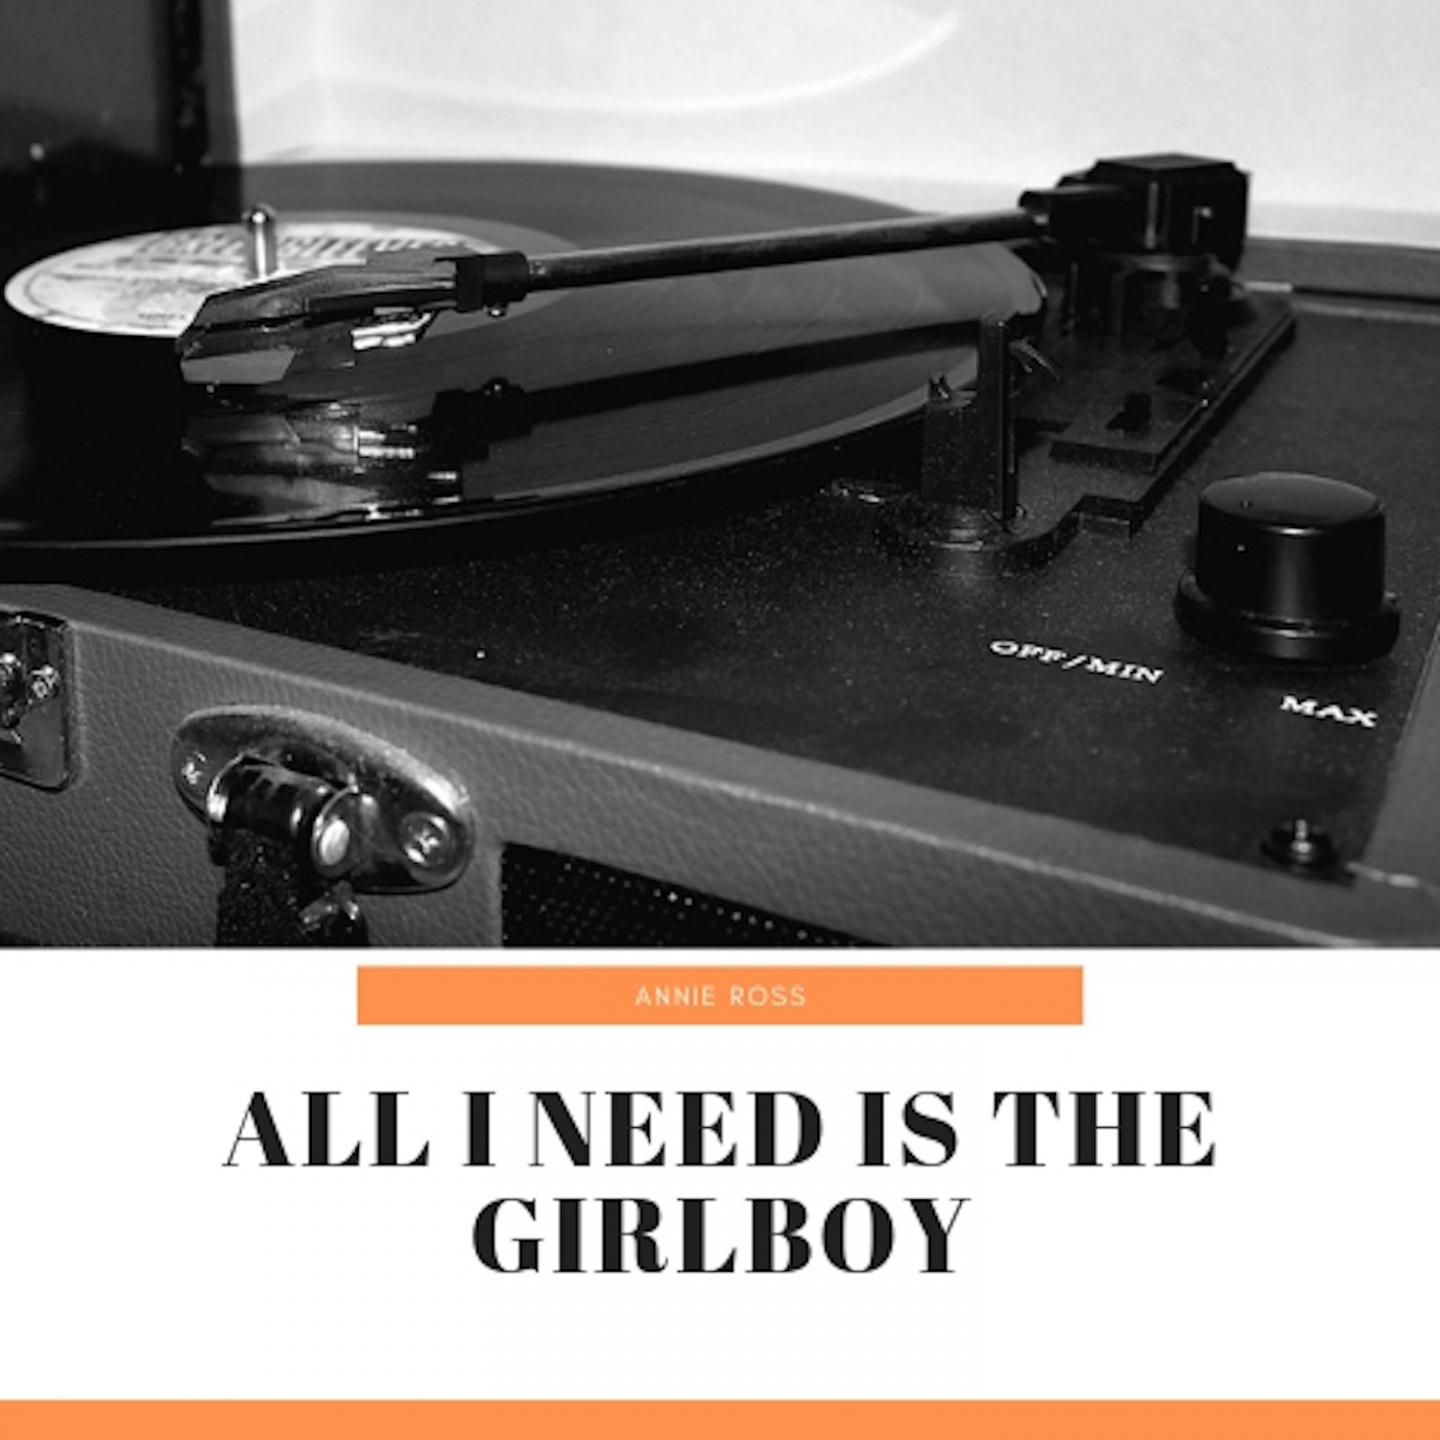 All I Need Is the Girlboy